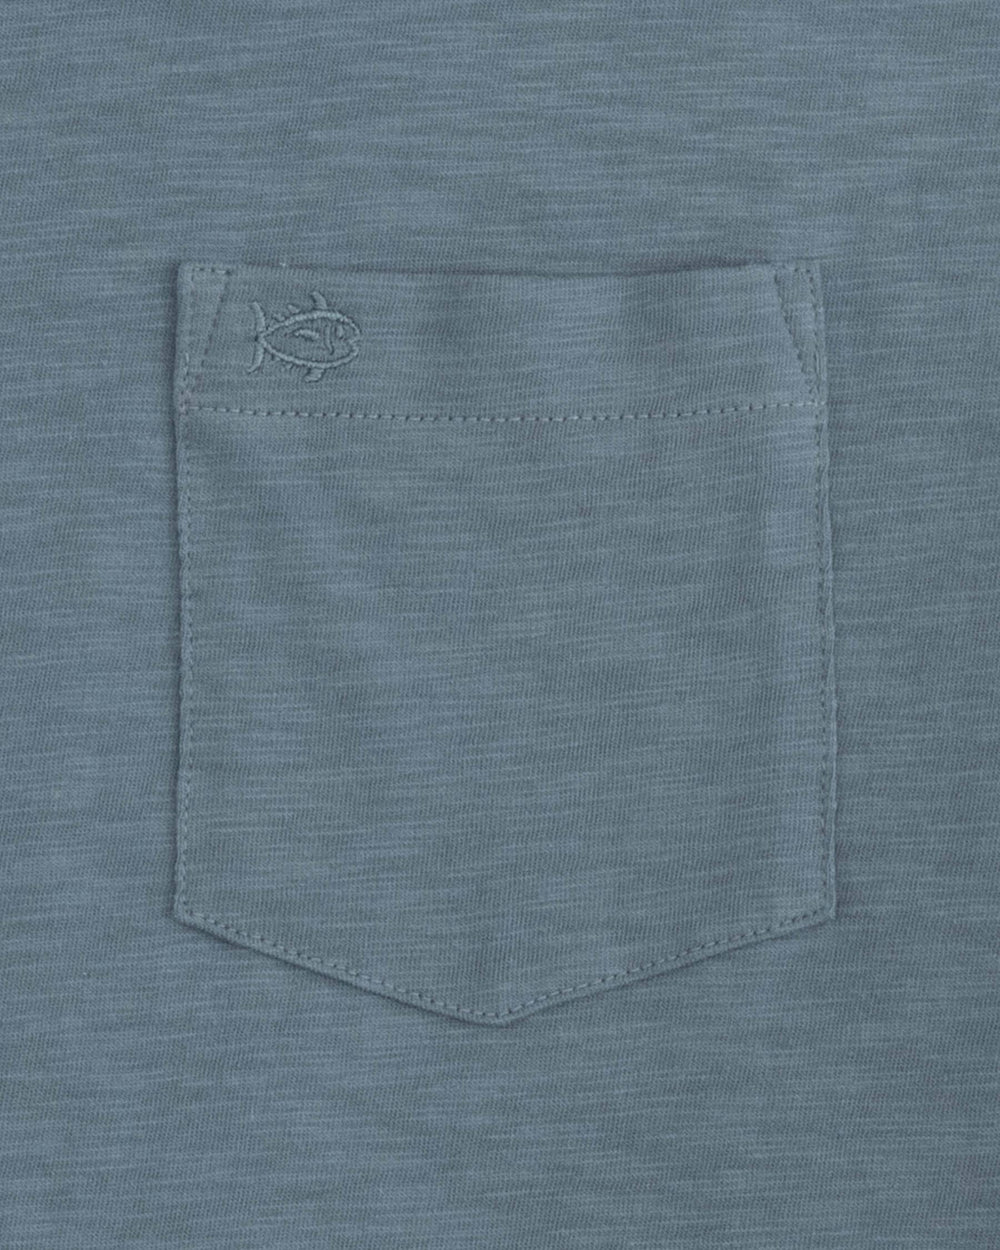 The pocket view of the Sun Farer T-Shirt by Southern Tide - Blue Haze